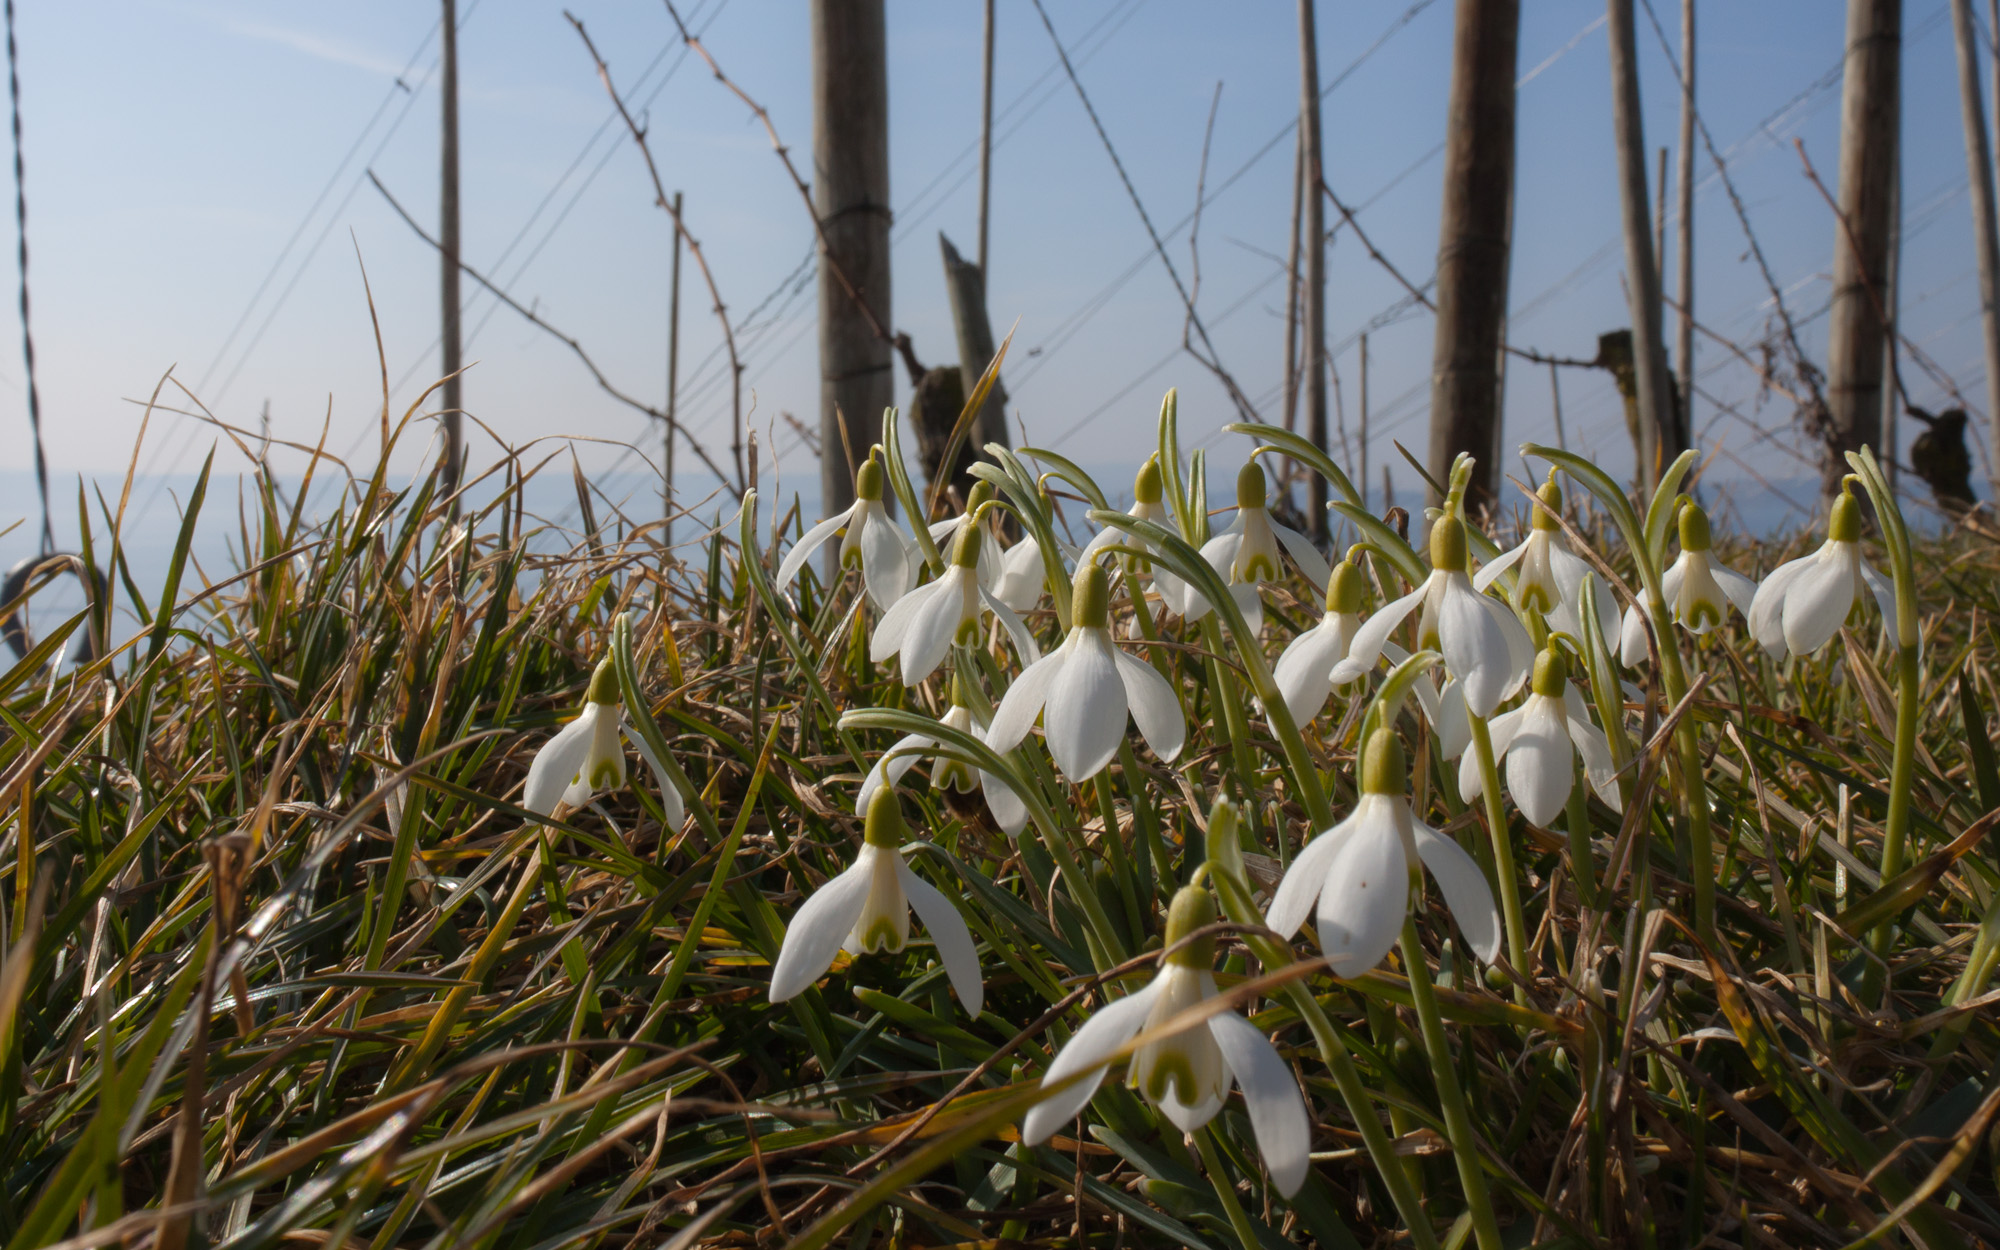 Snowdrops - Spring creeping up on a winter vineyard